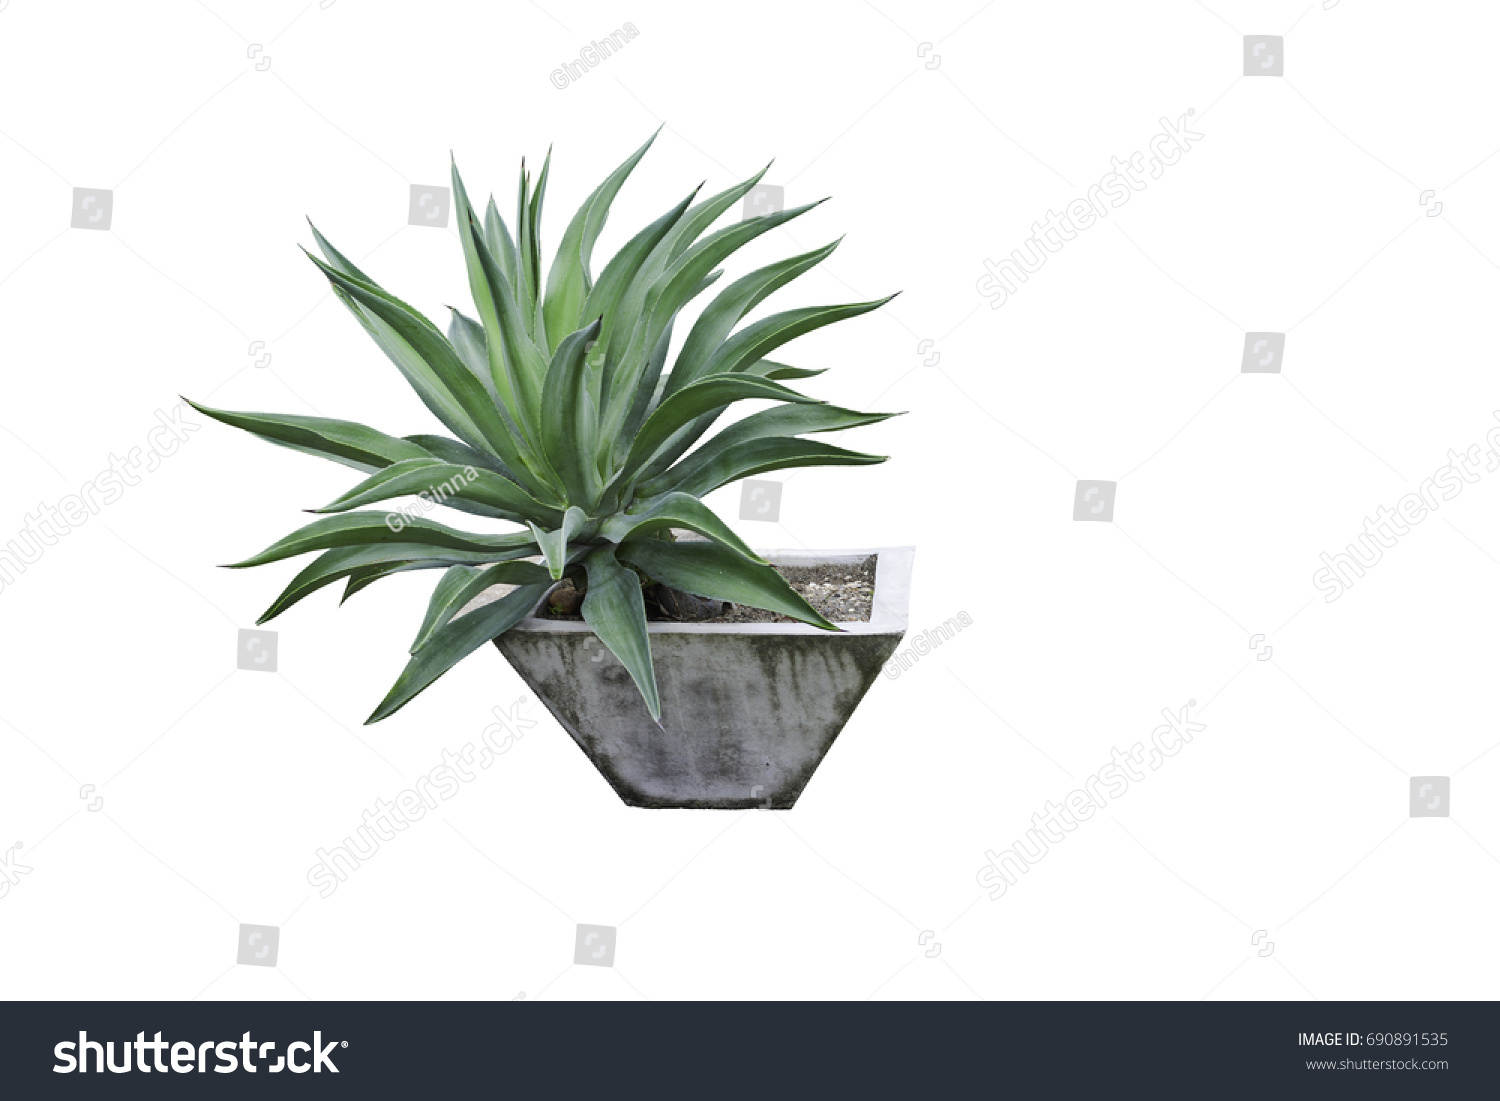 Plant a potted plant isolated on white with clipping path  #690891535